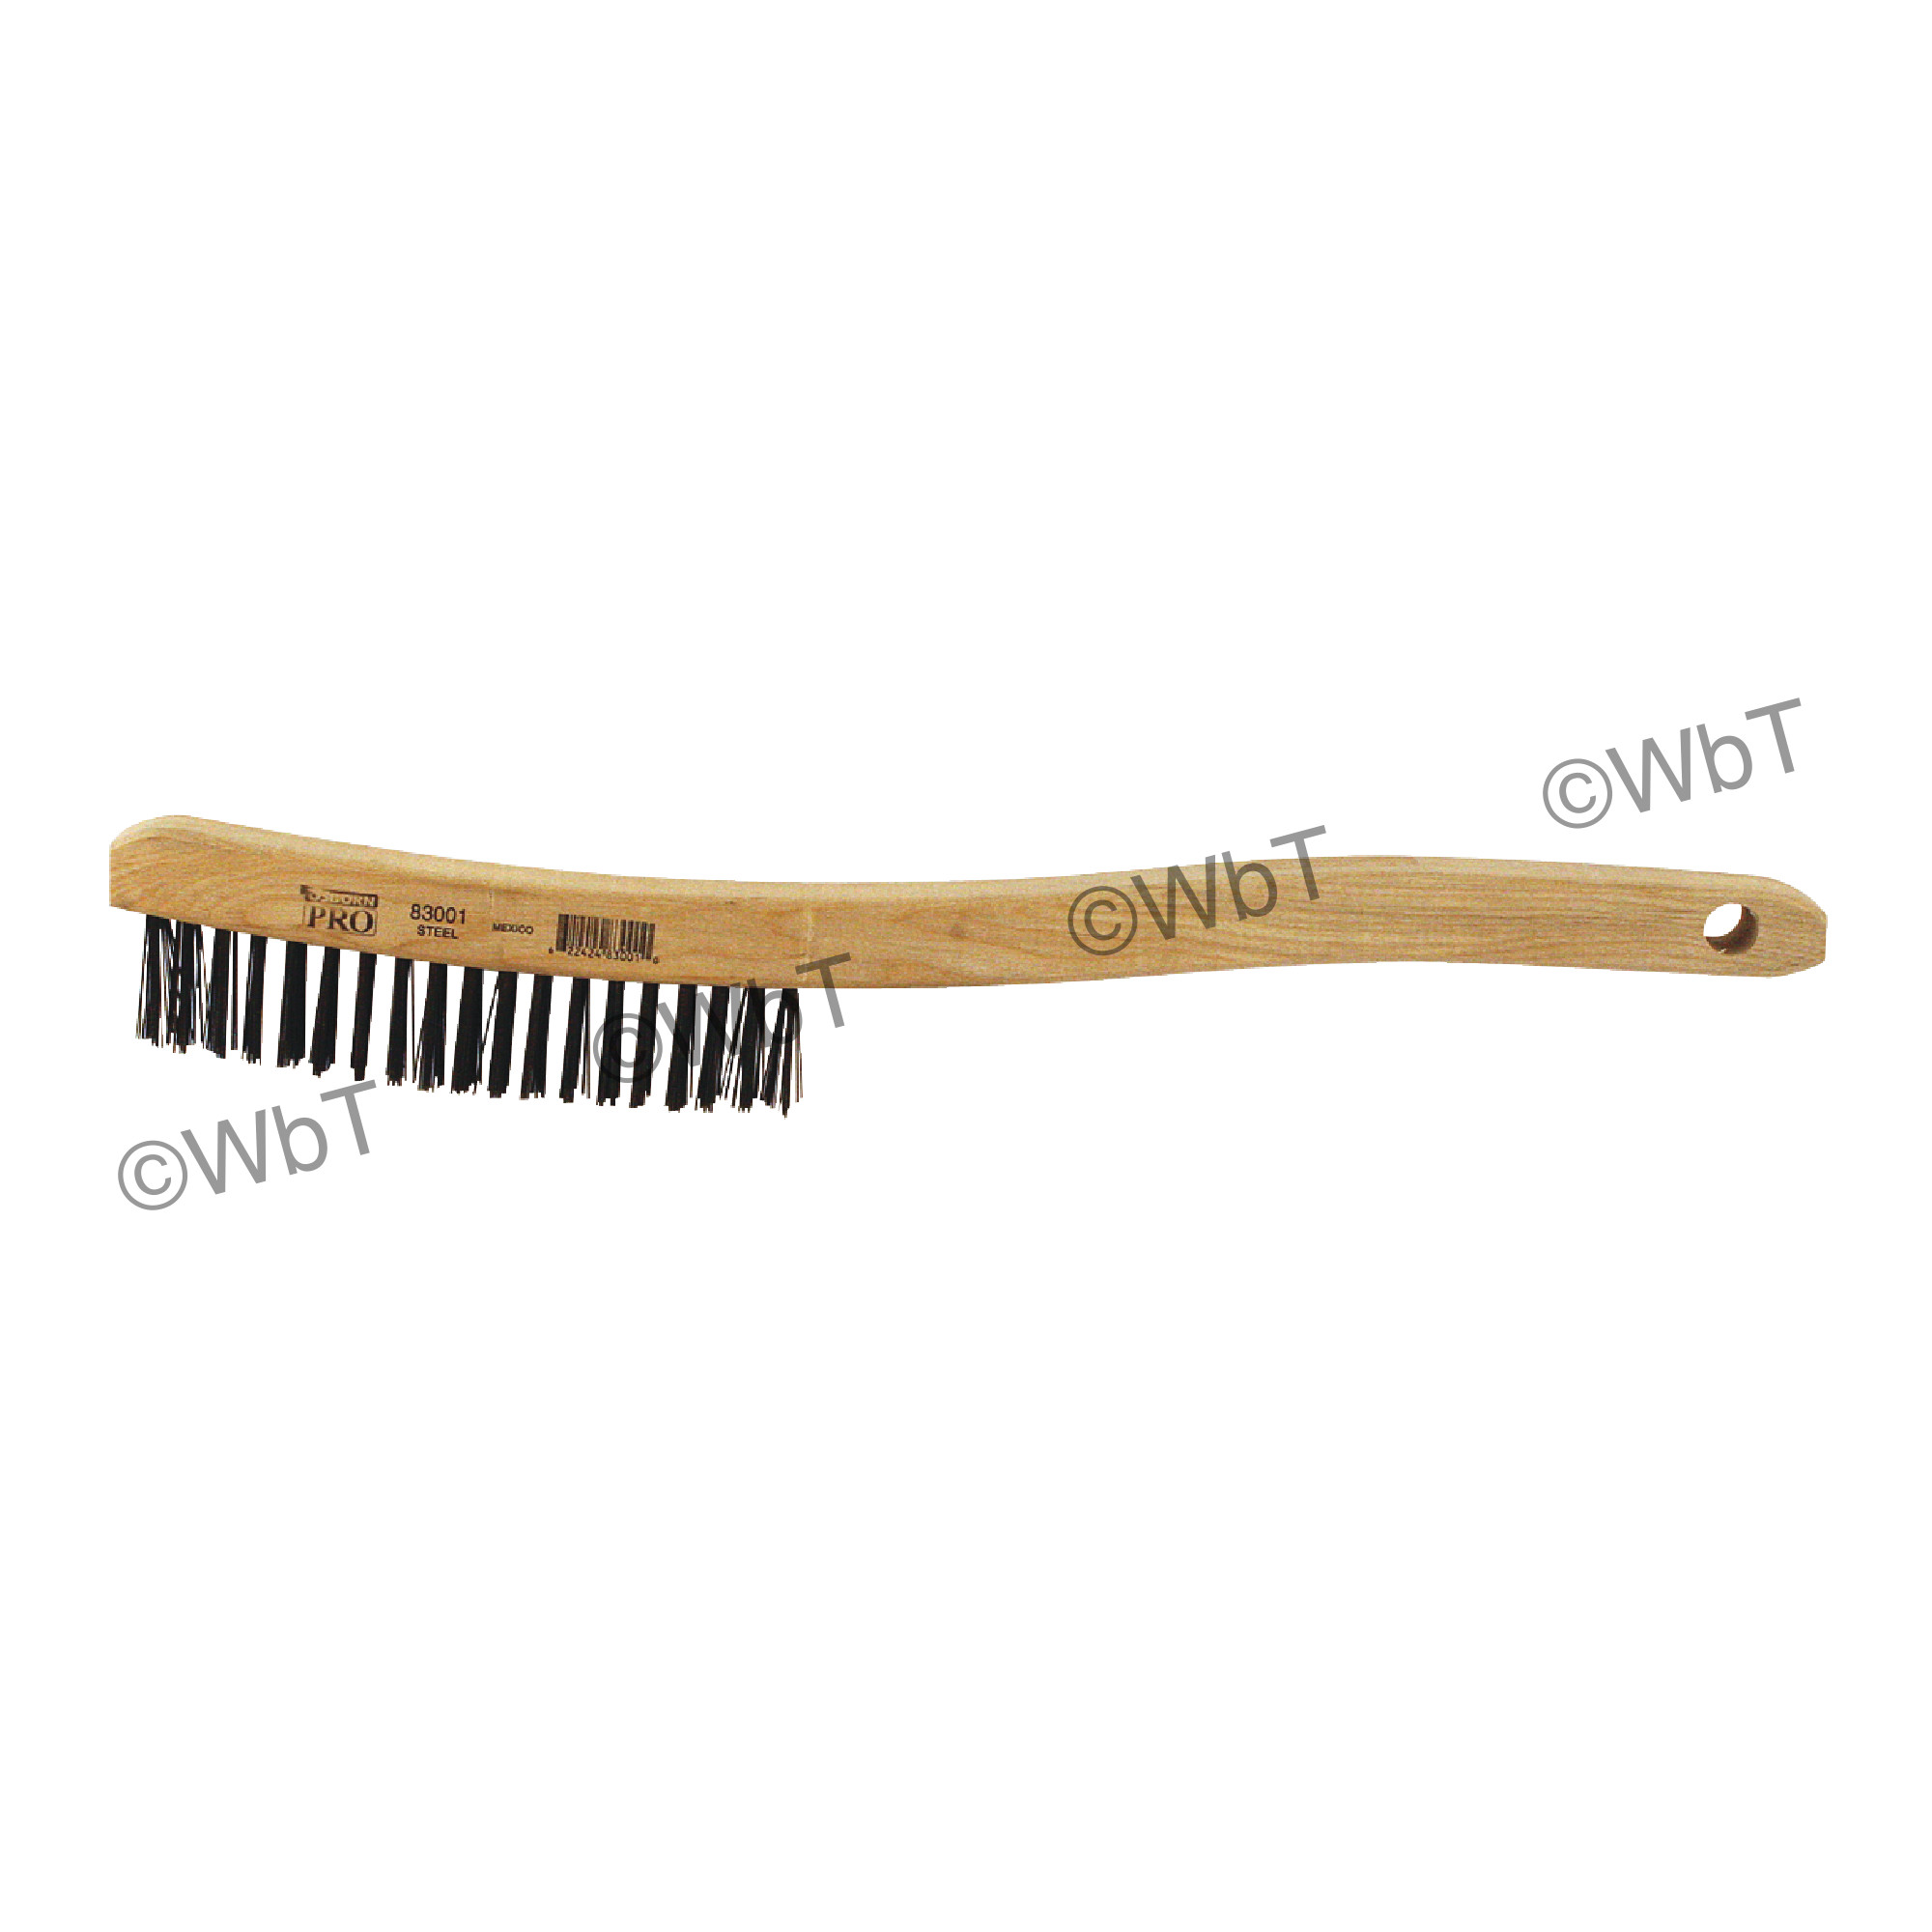 13-11/16" Economy Curved Handle Scratch Brush